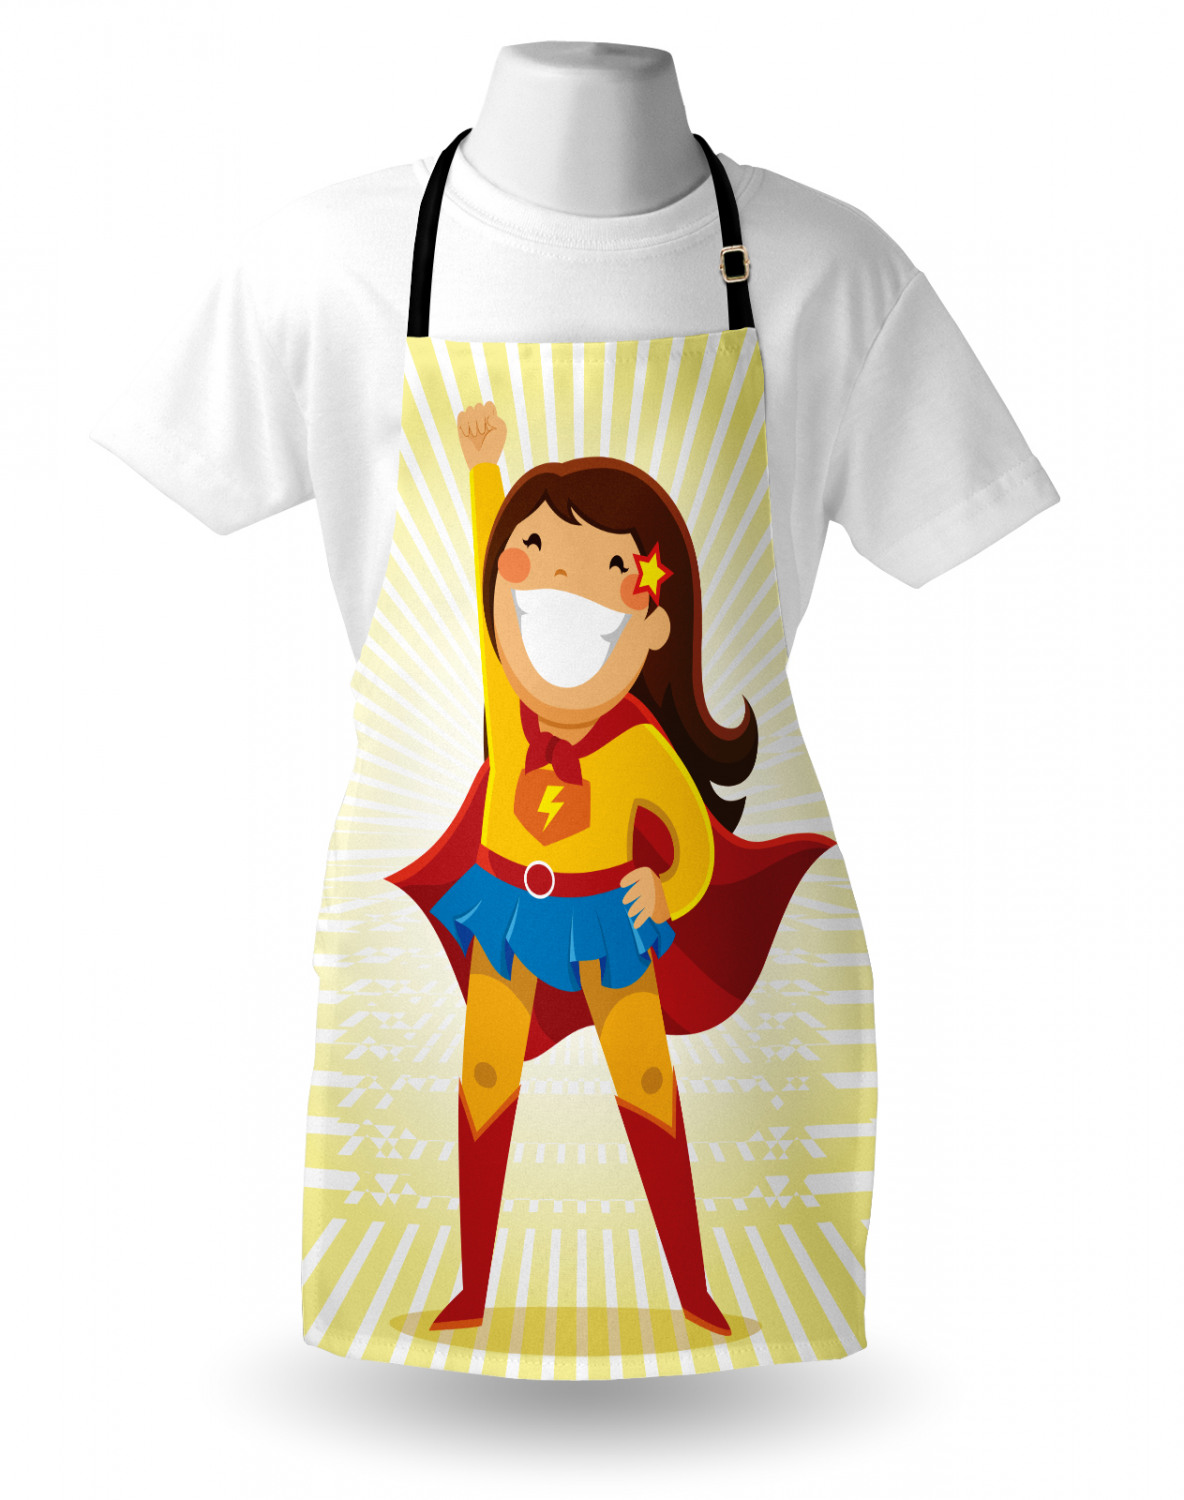 Superhero Apron Courageous Little Girl with a Big Smile in Costume Standing in a Heroic Position, Unisex Kitchen Bib Apron with Adjustable Neck for Cooking Baking Gardening, Multicolor, by Ambesonne - image 3 of 3